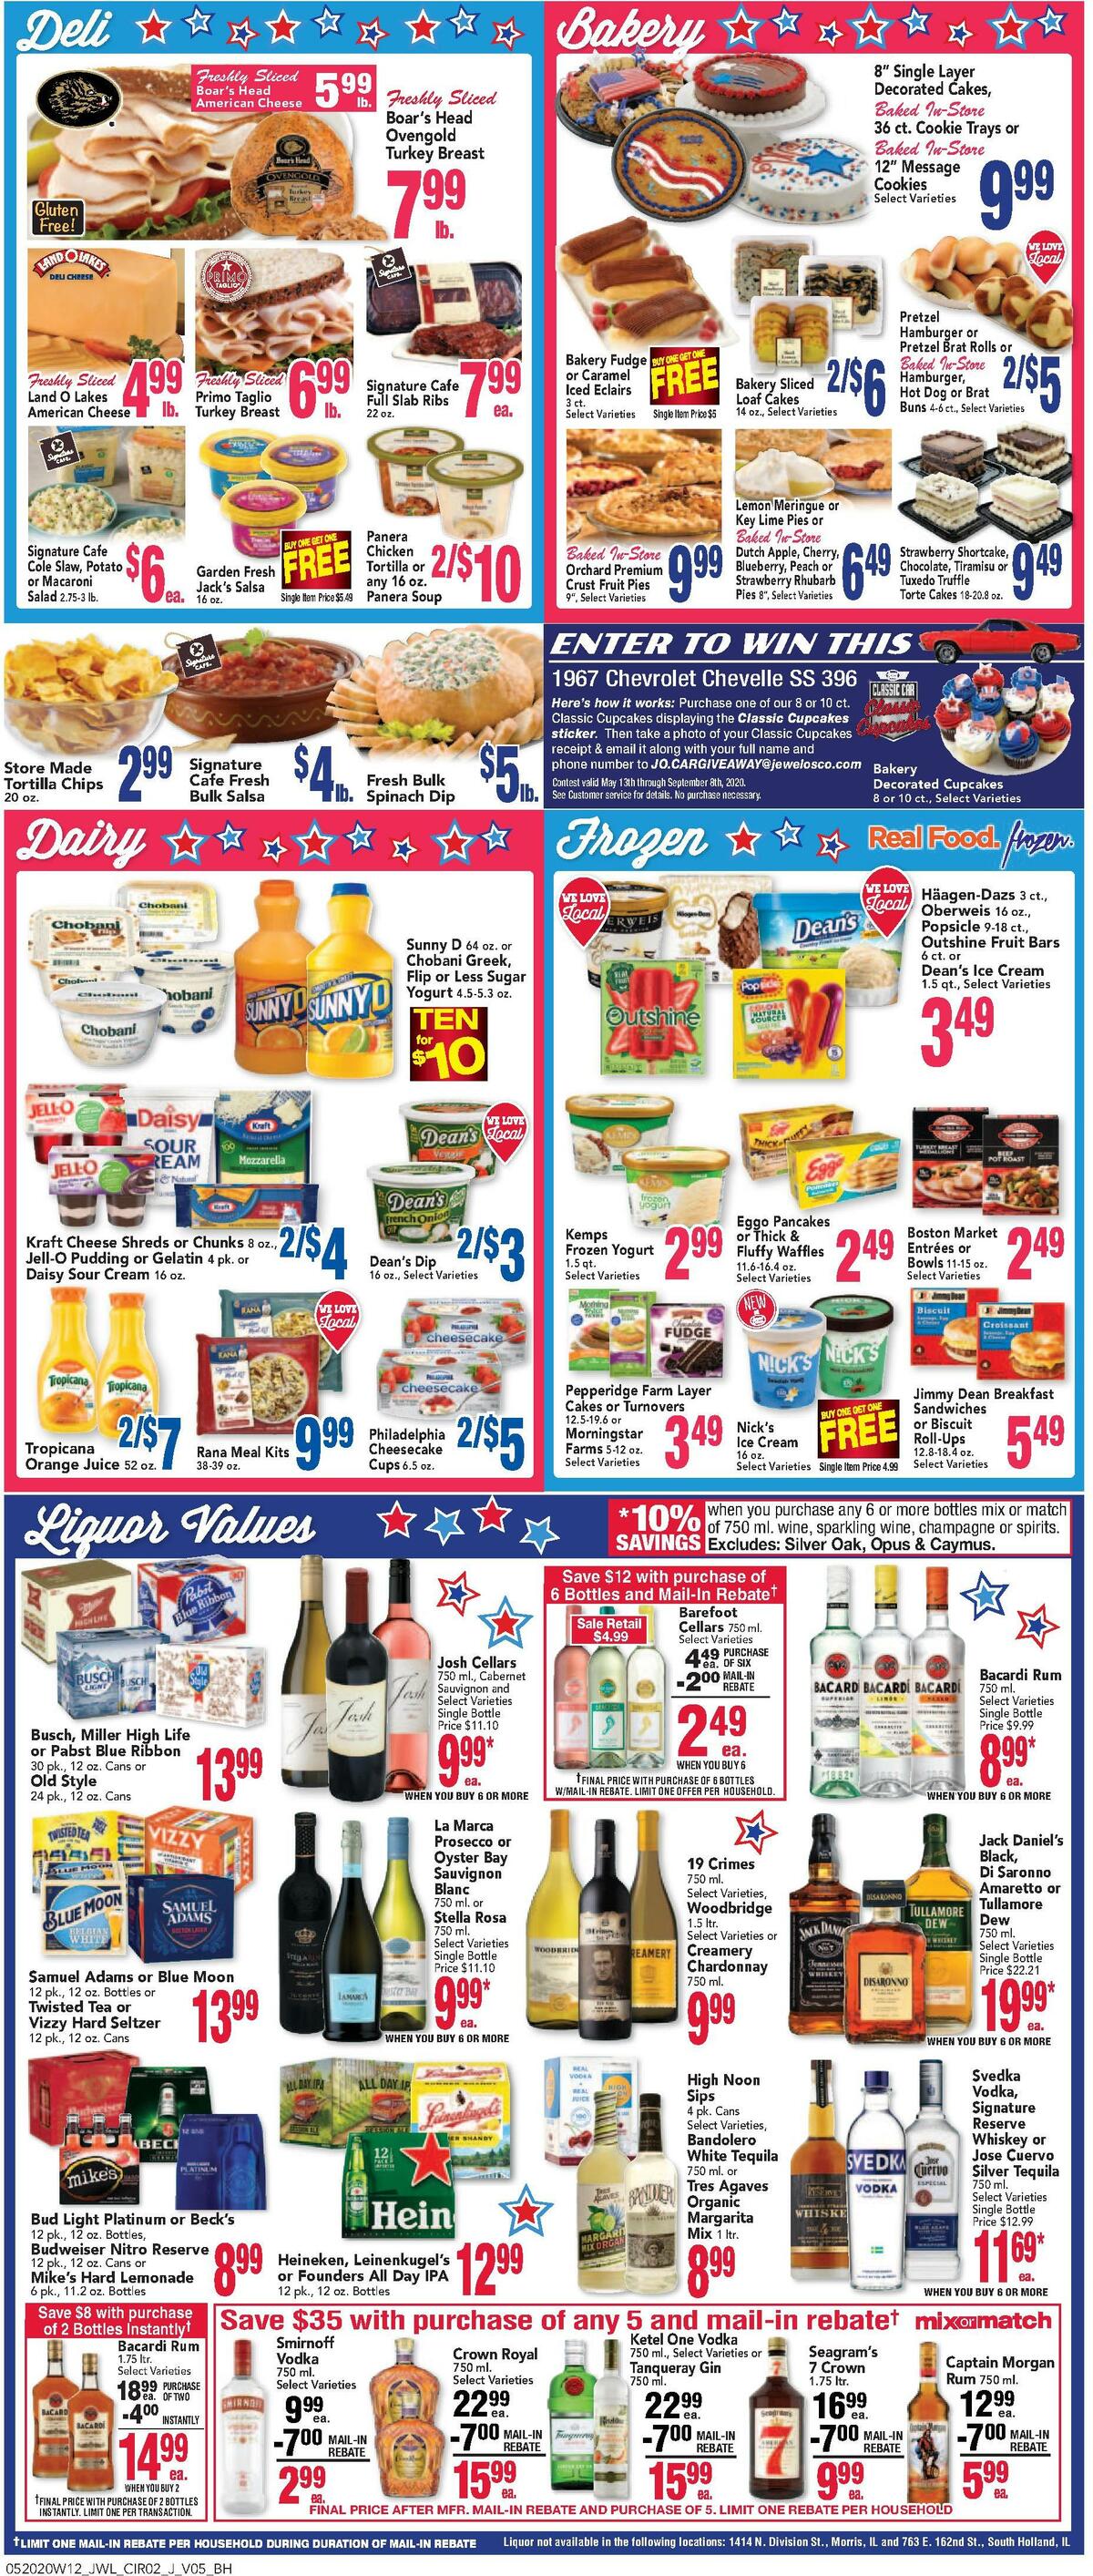 Jewel Osco Weekly Ad from May 20